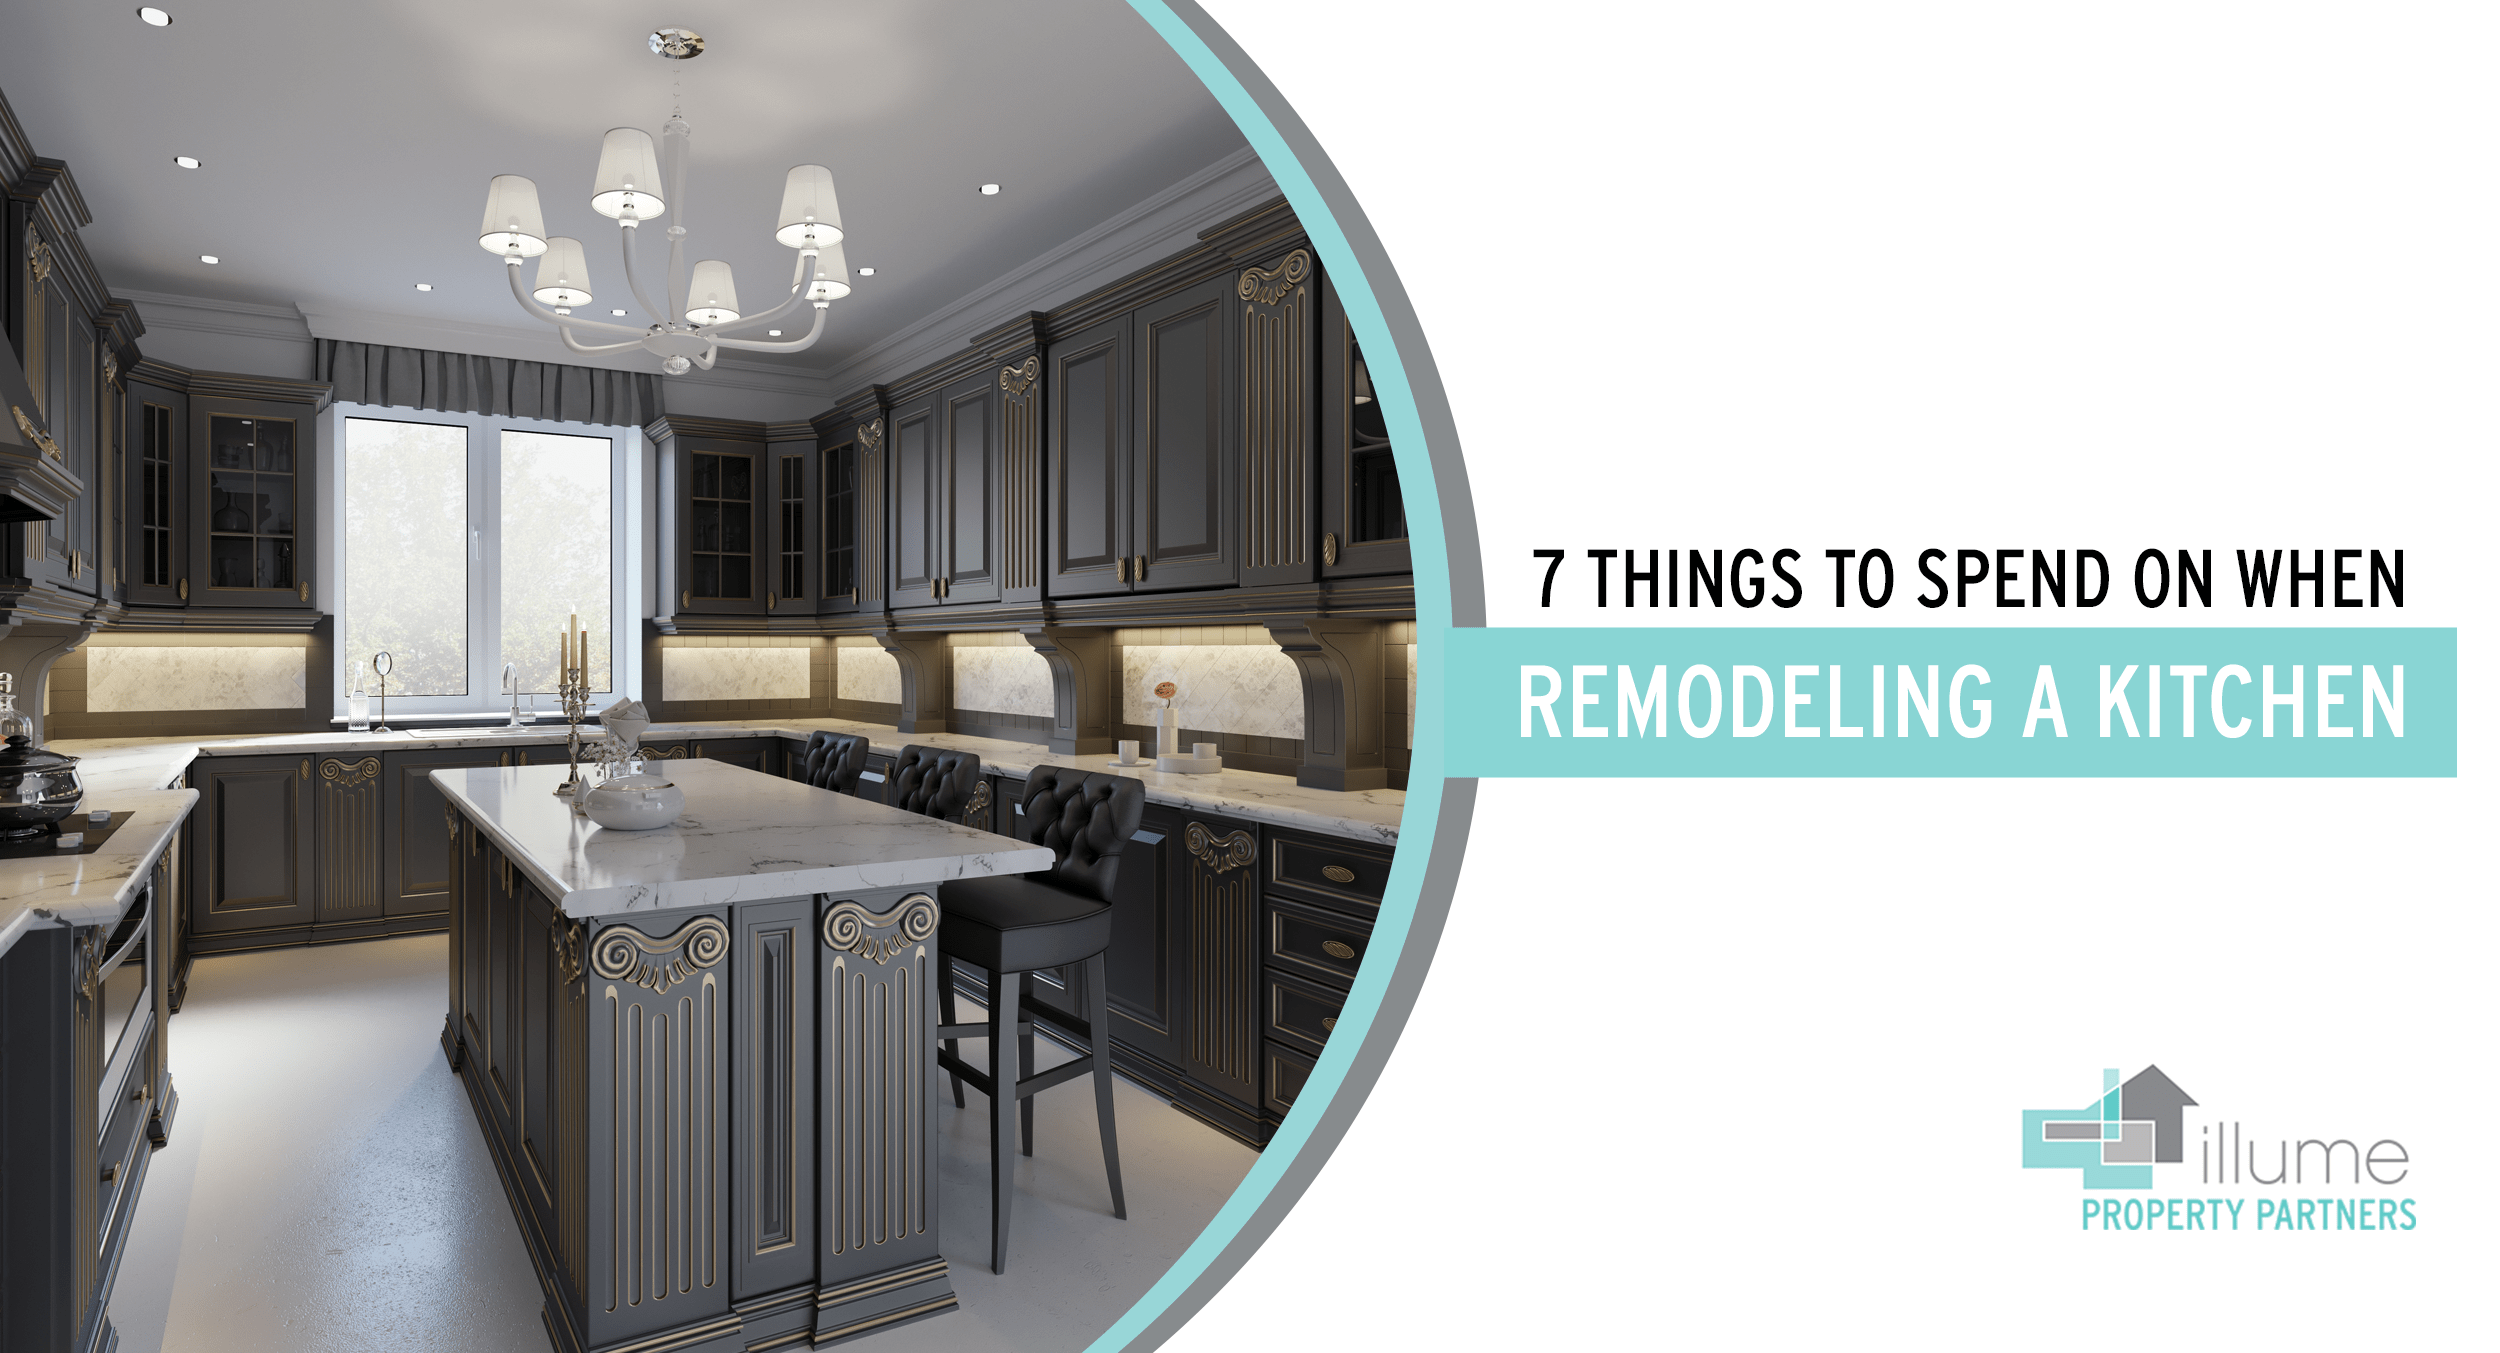 7 Things to Spend on When Remodeling a Kitchen